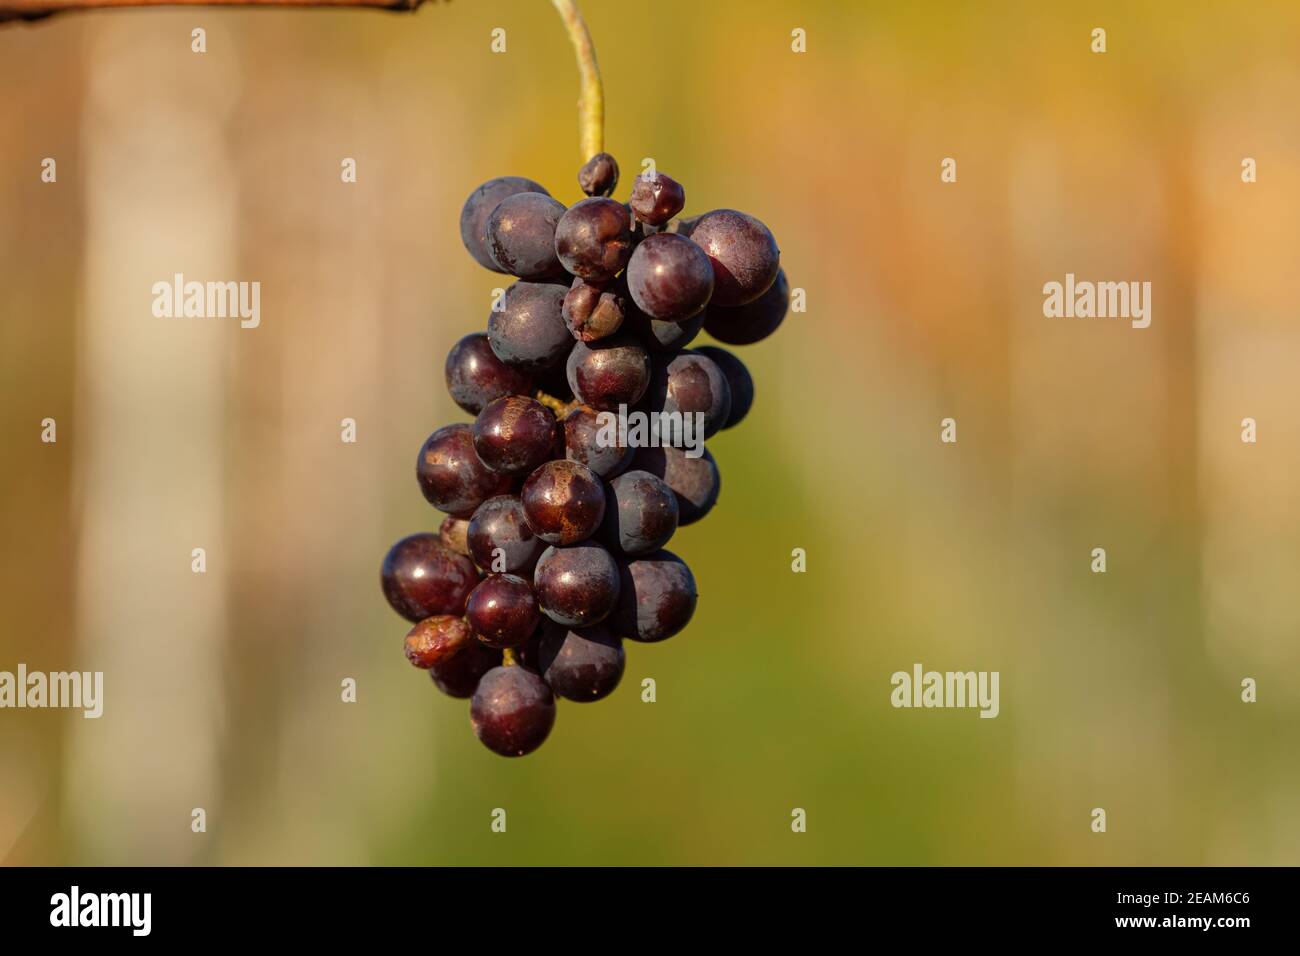 Very ripe red wine grapes Stock Photo